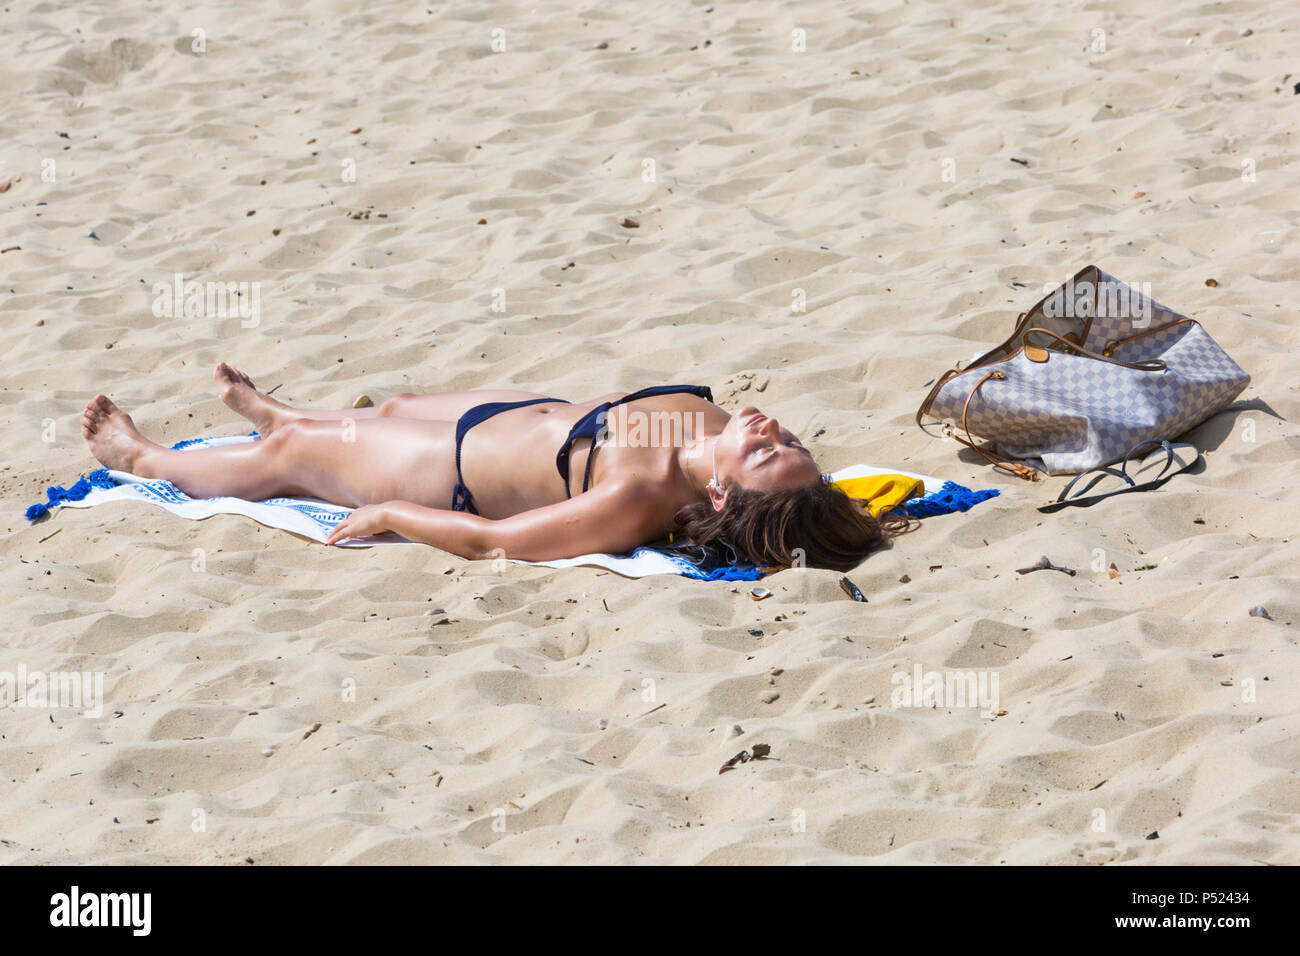 Bournemouth, Dorset, UK. 24th June 2018. UK weather: another lovely hot sunny day as visitors head to the seaside to make the most of the sunshine as temperatures rise for the heatwave. Woman sunbather in bikini soaking up the sun on Bournemouth beach - sunbathing. Credit: Carolyn Jenkins/Alamy Live News Stock Photo